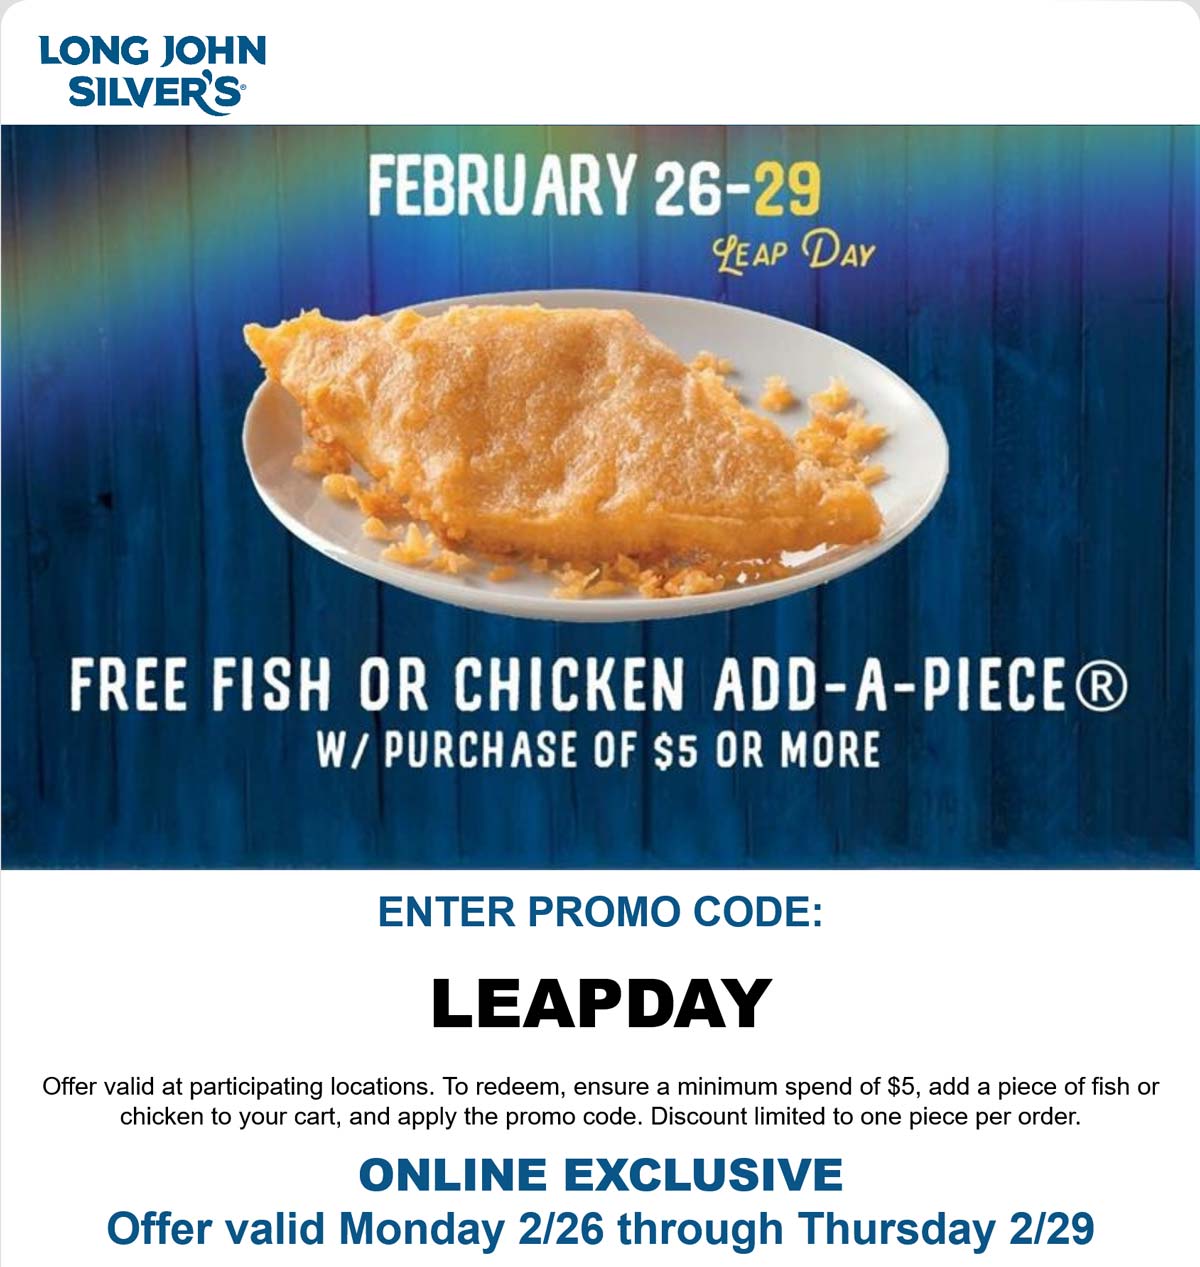 Long John Silvers restaurants Coupon  Free fish or chicken on $5 Thursday at Long John Silvers via promo code LEAPDAY #longjohnsilvers 